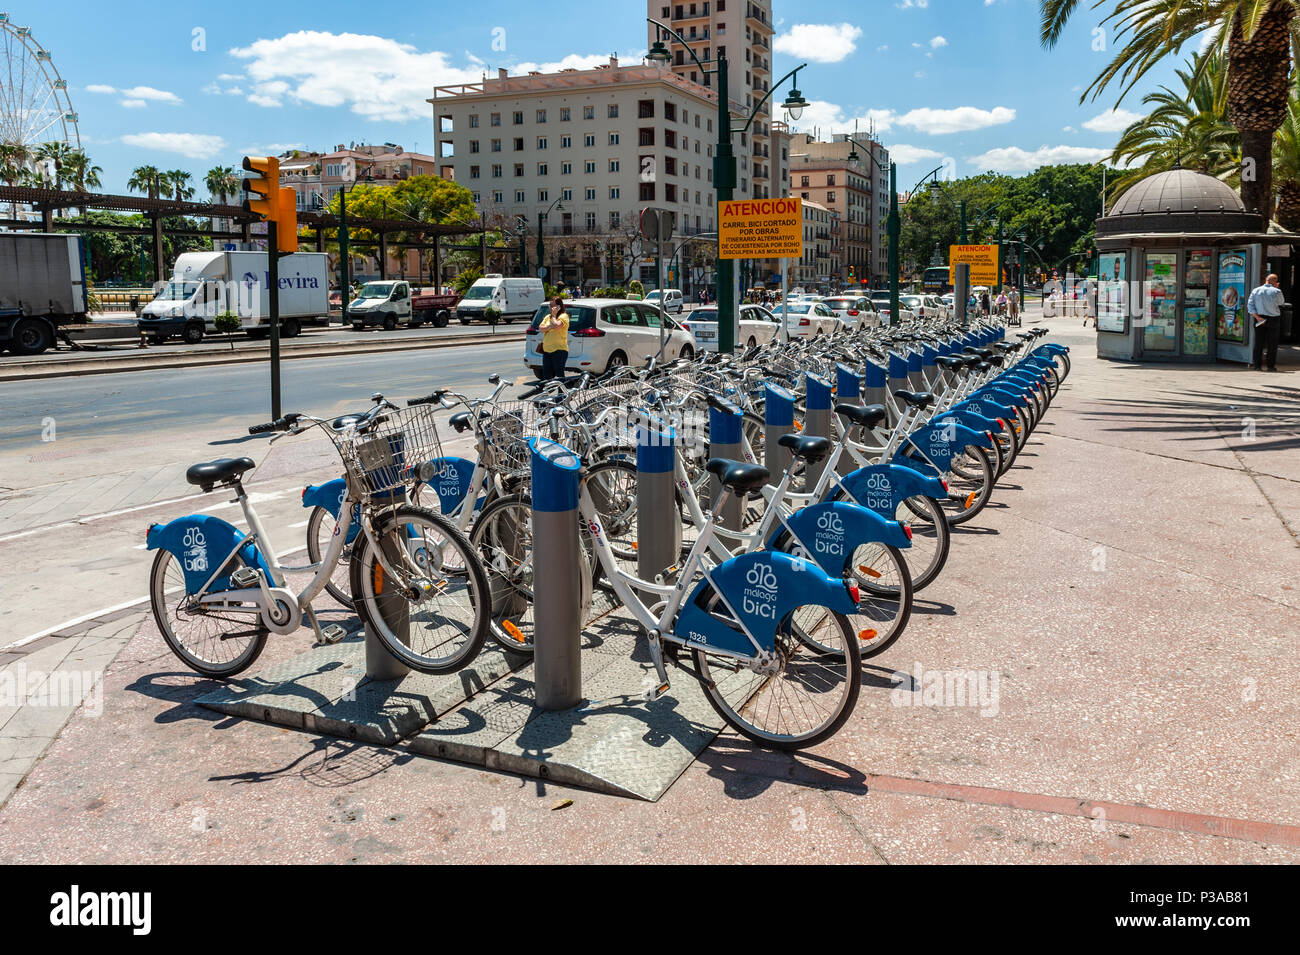 Rows of Malaga Bici, public sharing bicycles, at a hire station in Malaga, Spain. Stock Photo